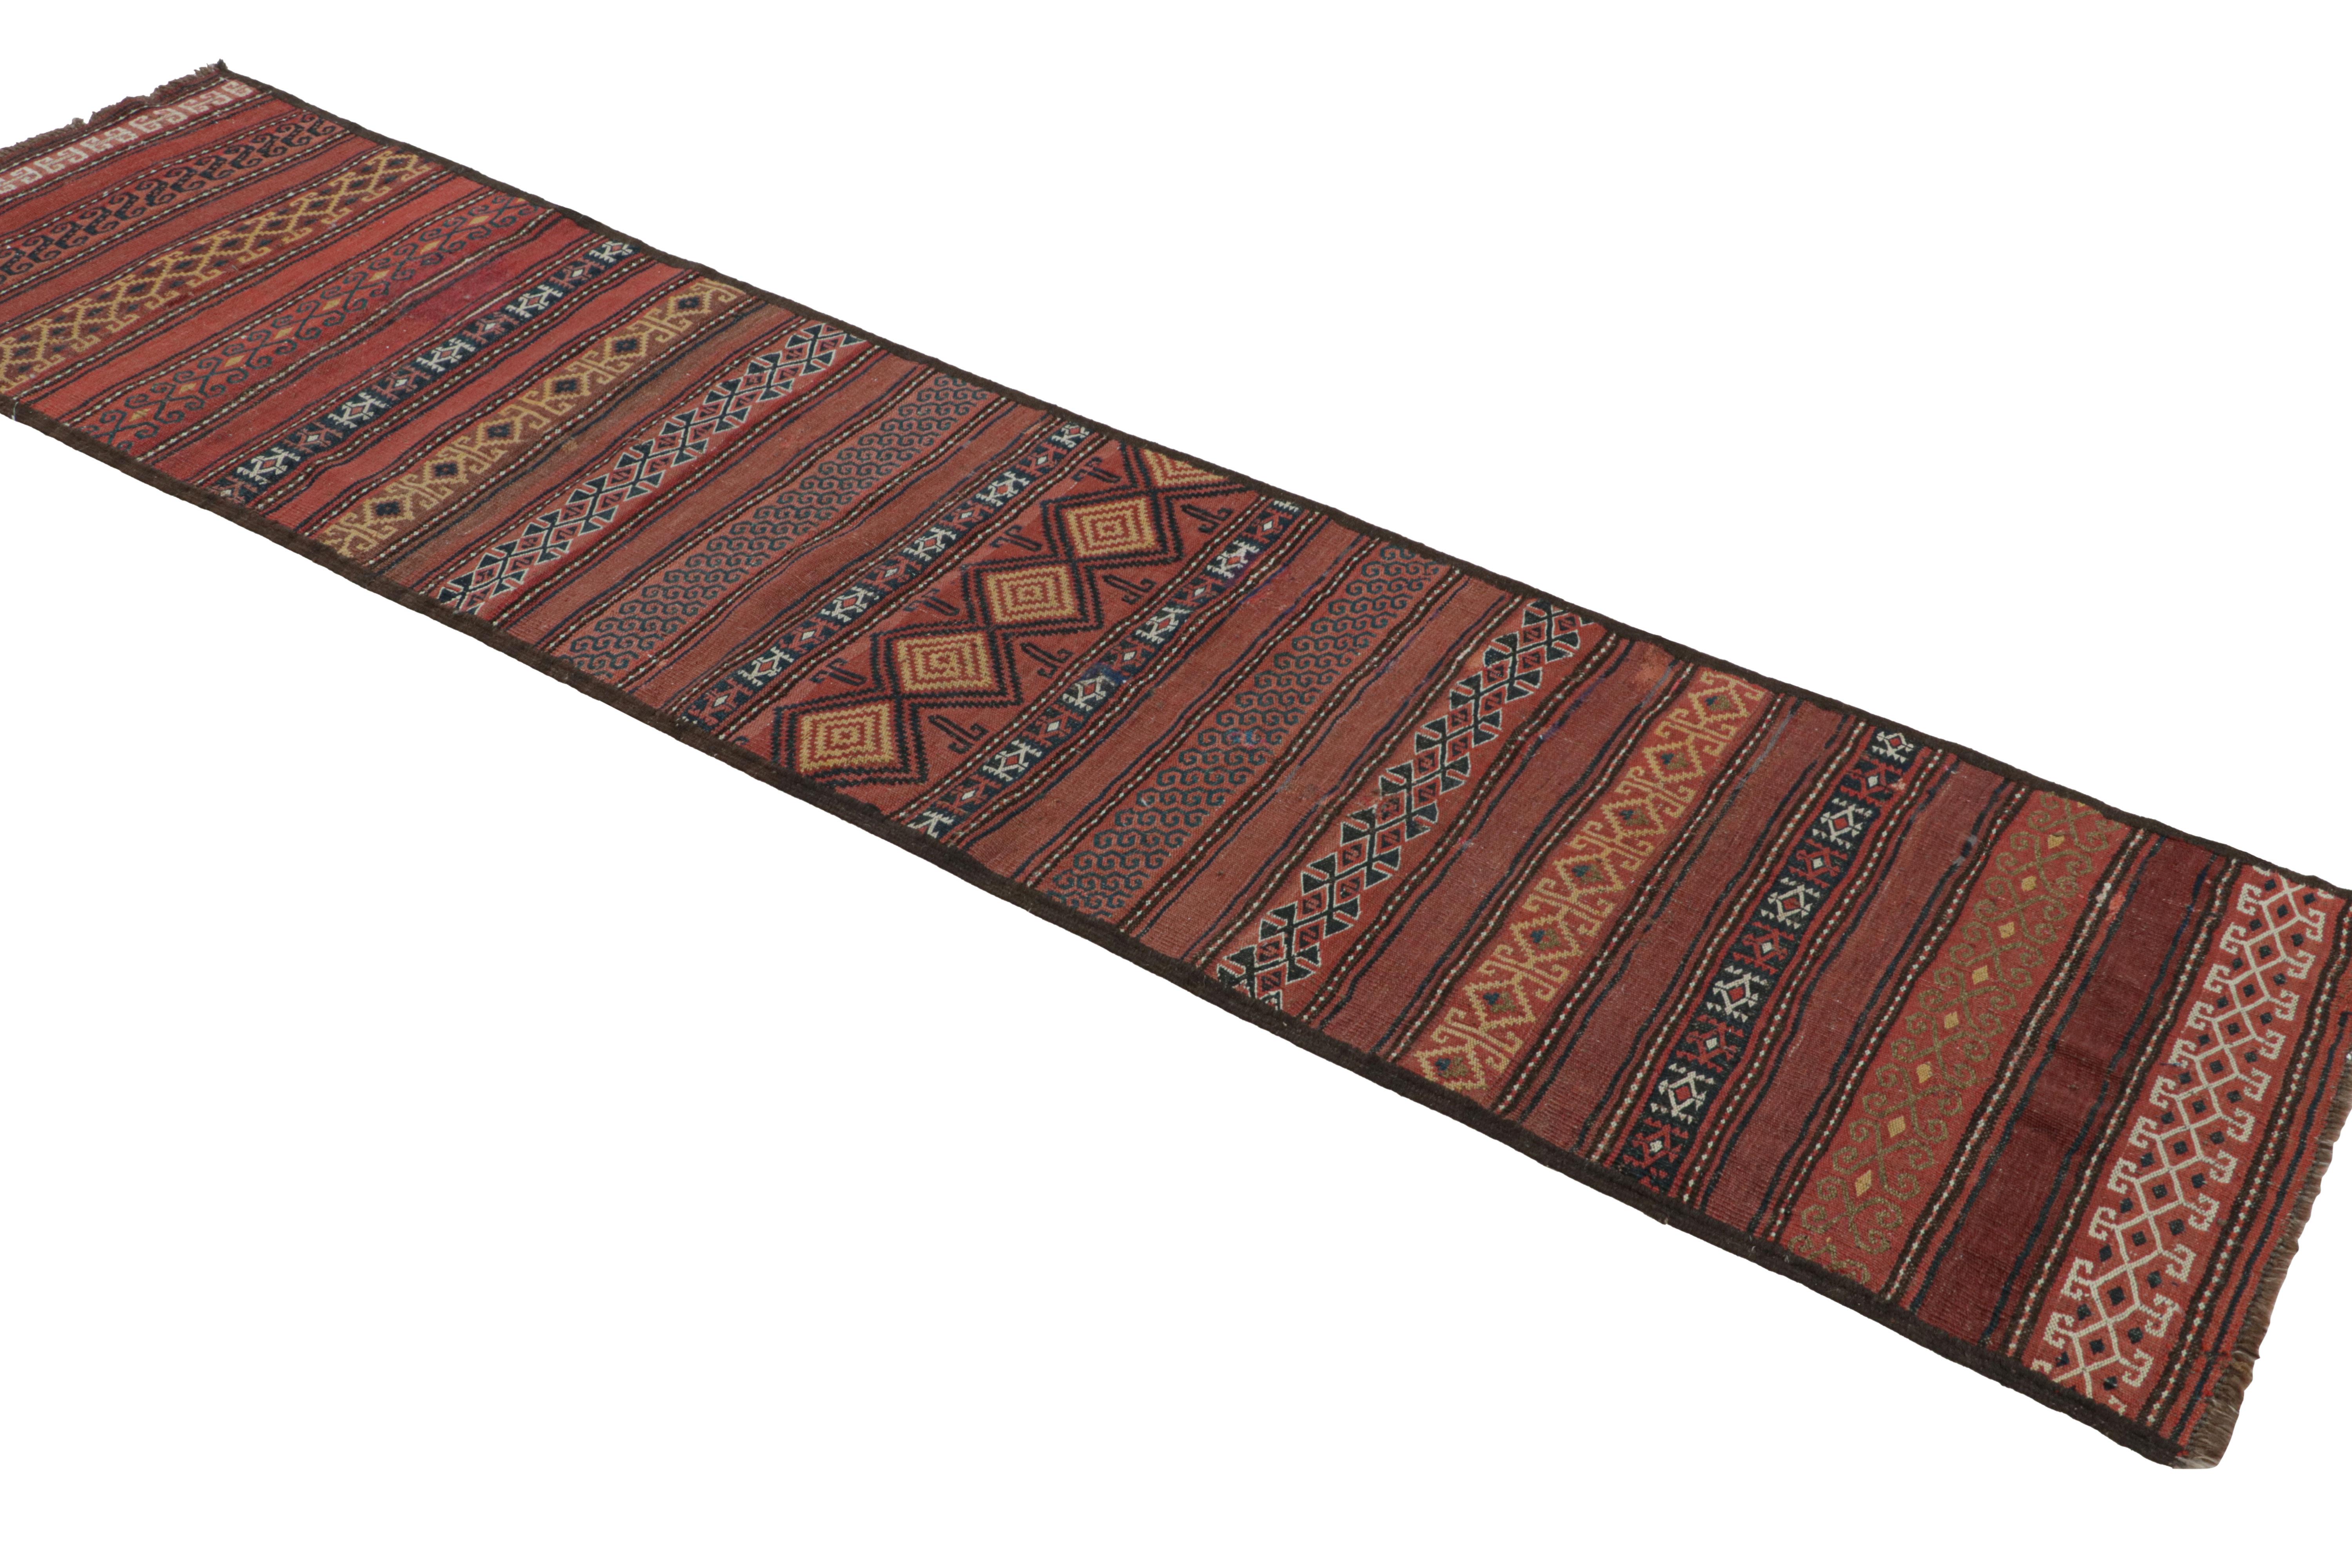 Tribal Vintage Kilim Runner Rug in Brick Red with Geometric Patterns, from Rug & Kilim For Sale